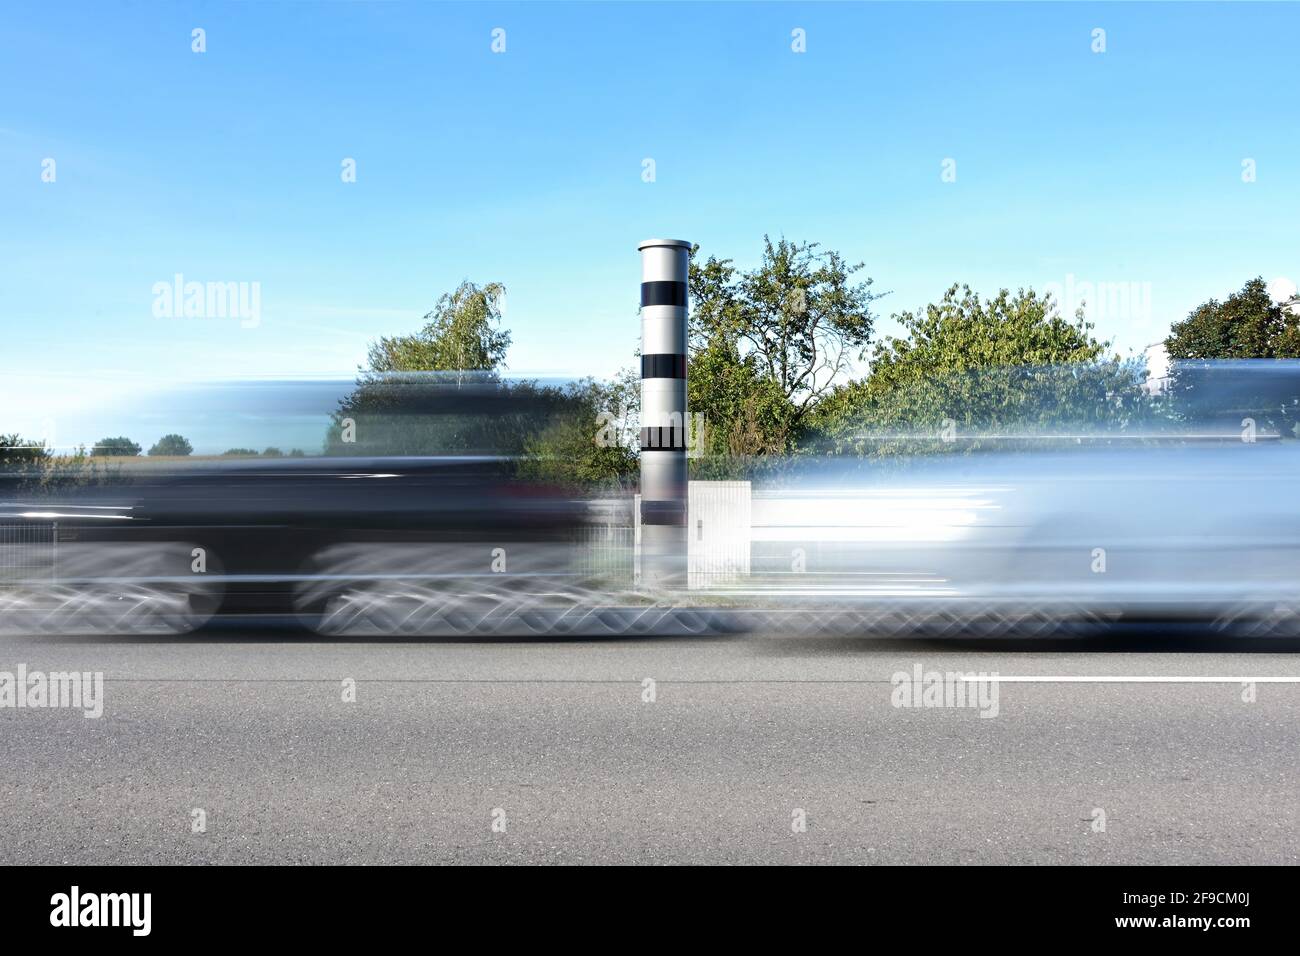 Fast cars in motion blur in front of an automatic speed measurement with light radar and camera for traffic enforcement, speeding may result in a mone Stock Photo